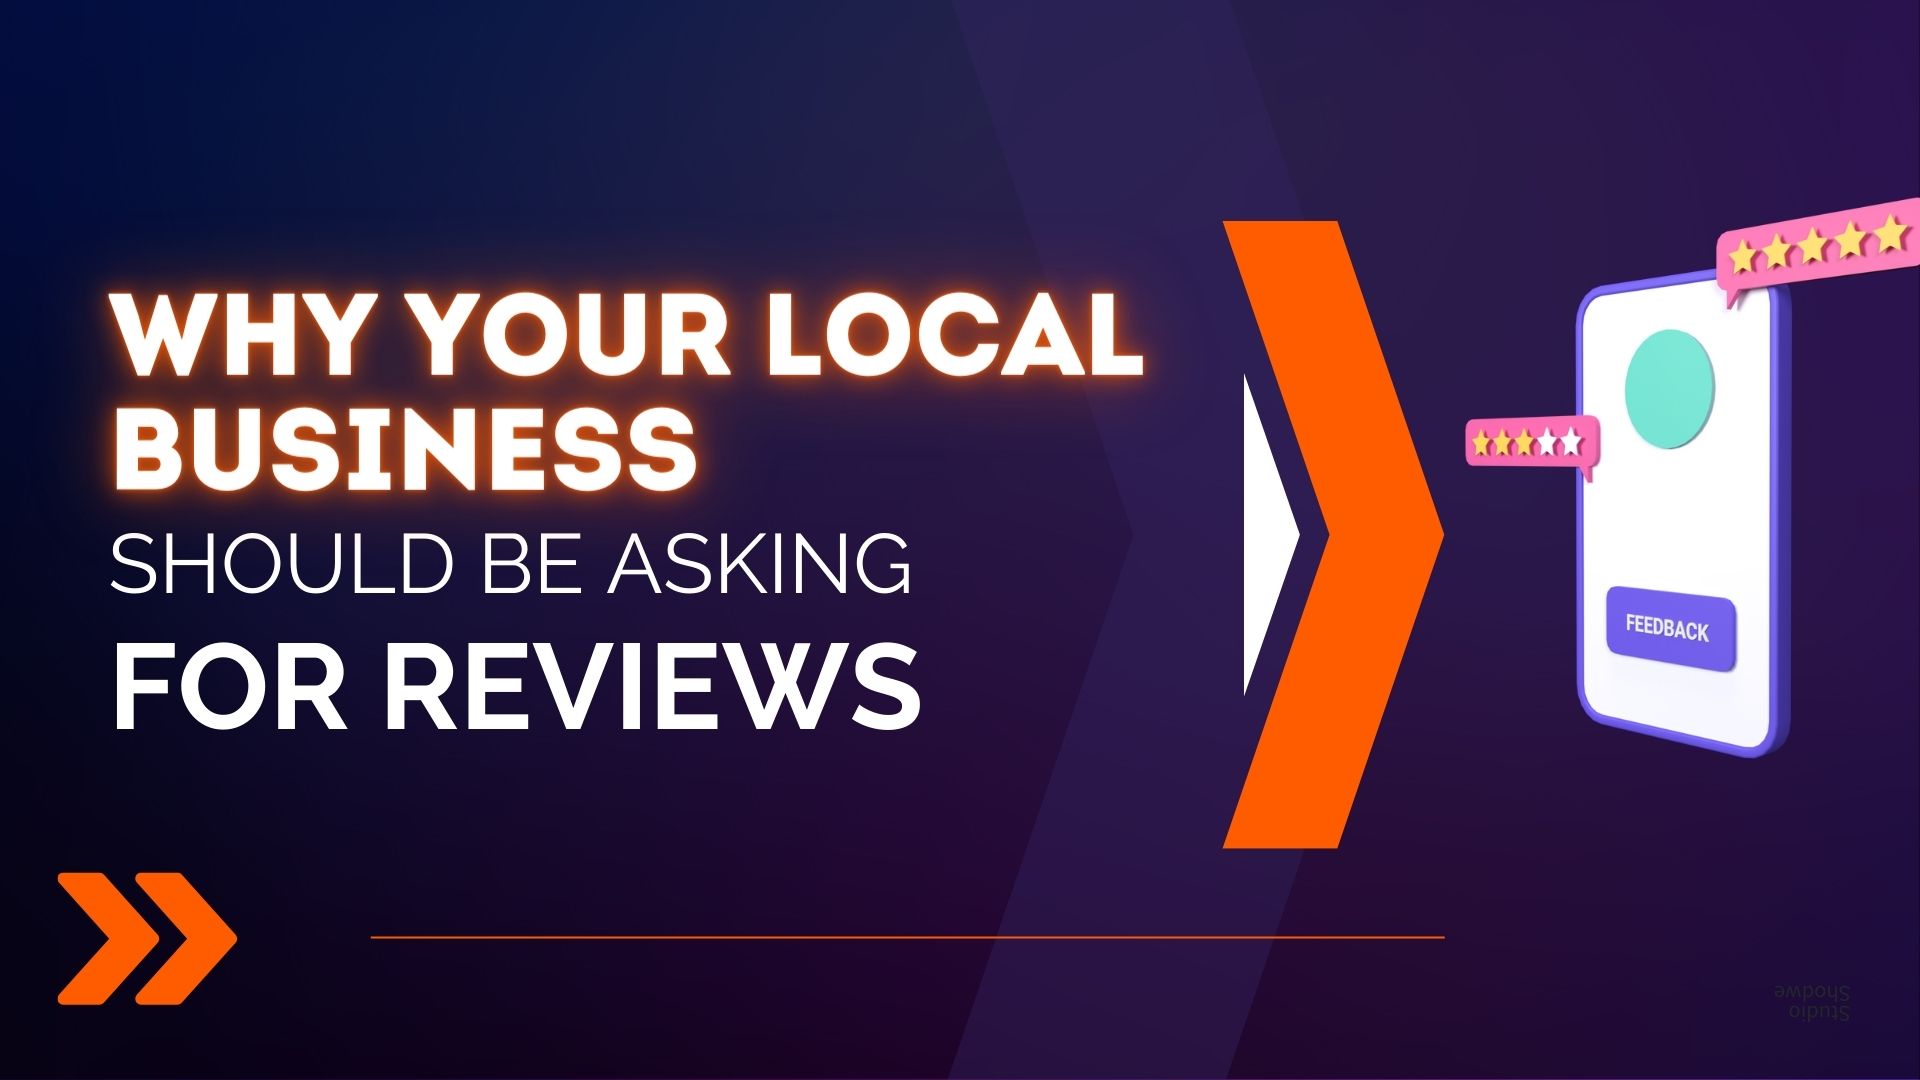 Why Your Local Business Should Be Asking For Reviews